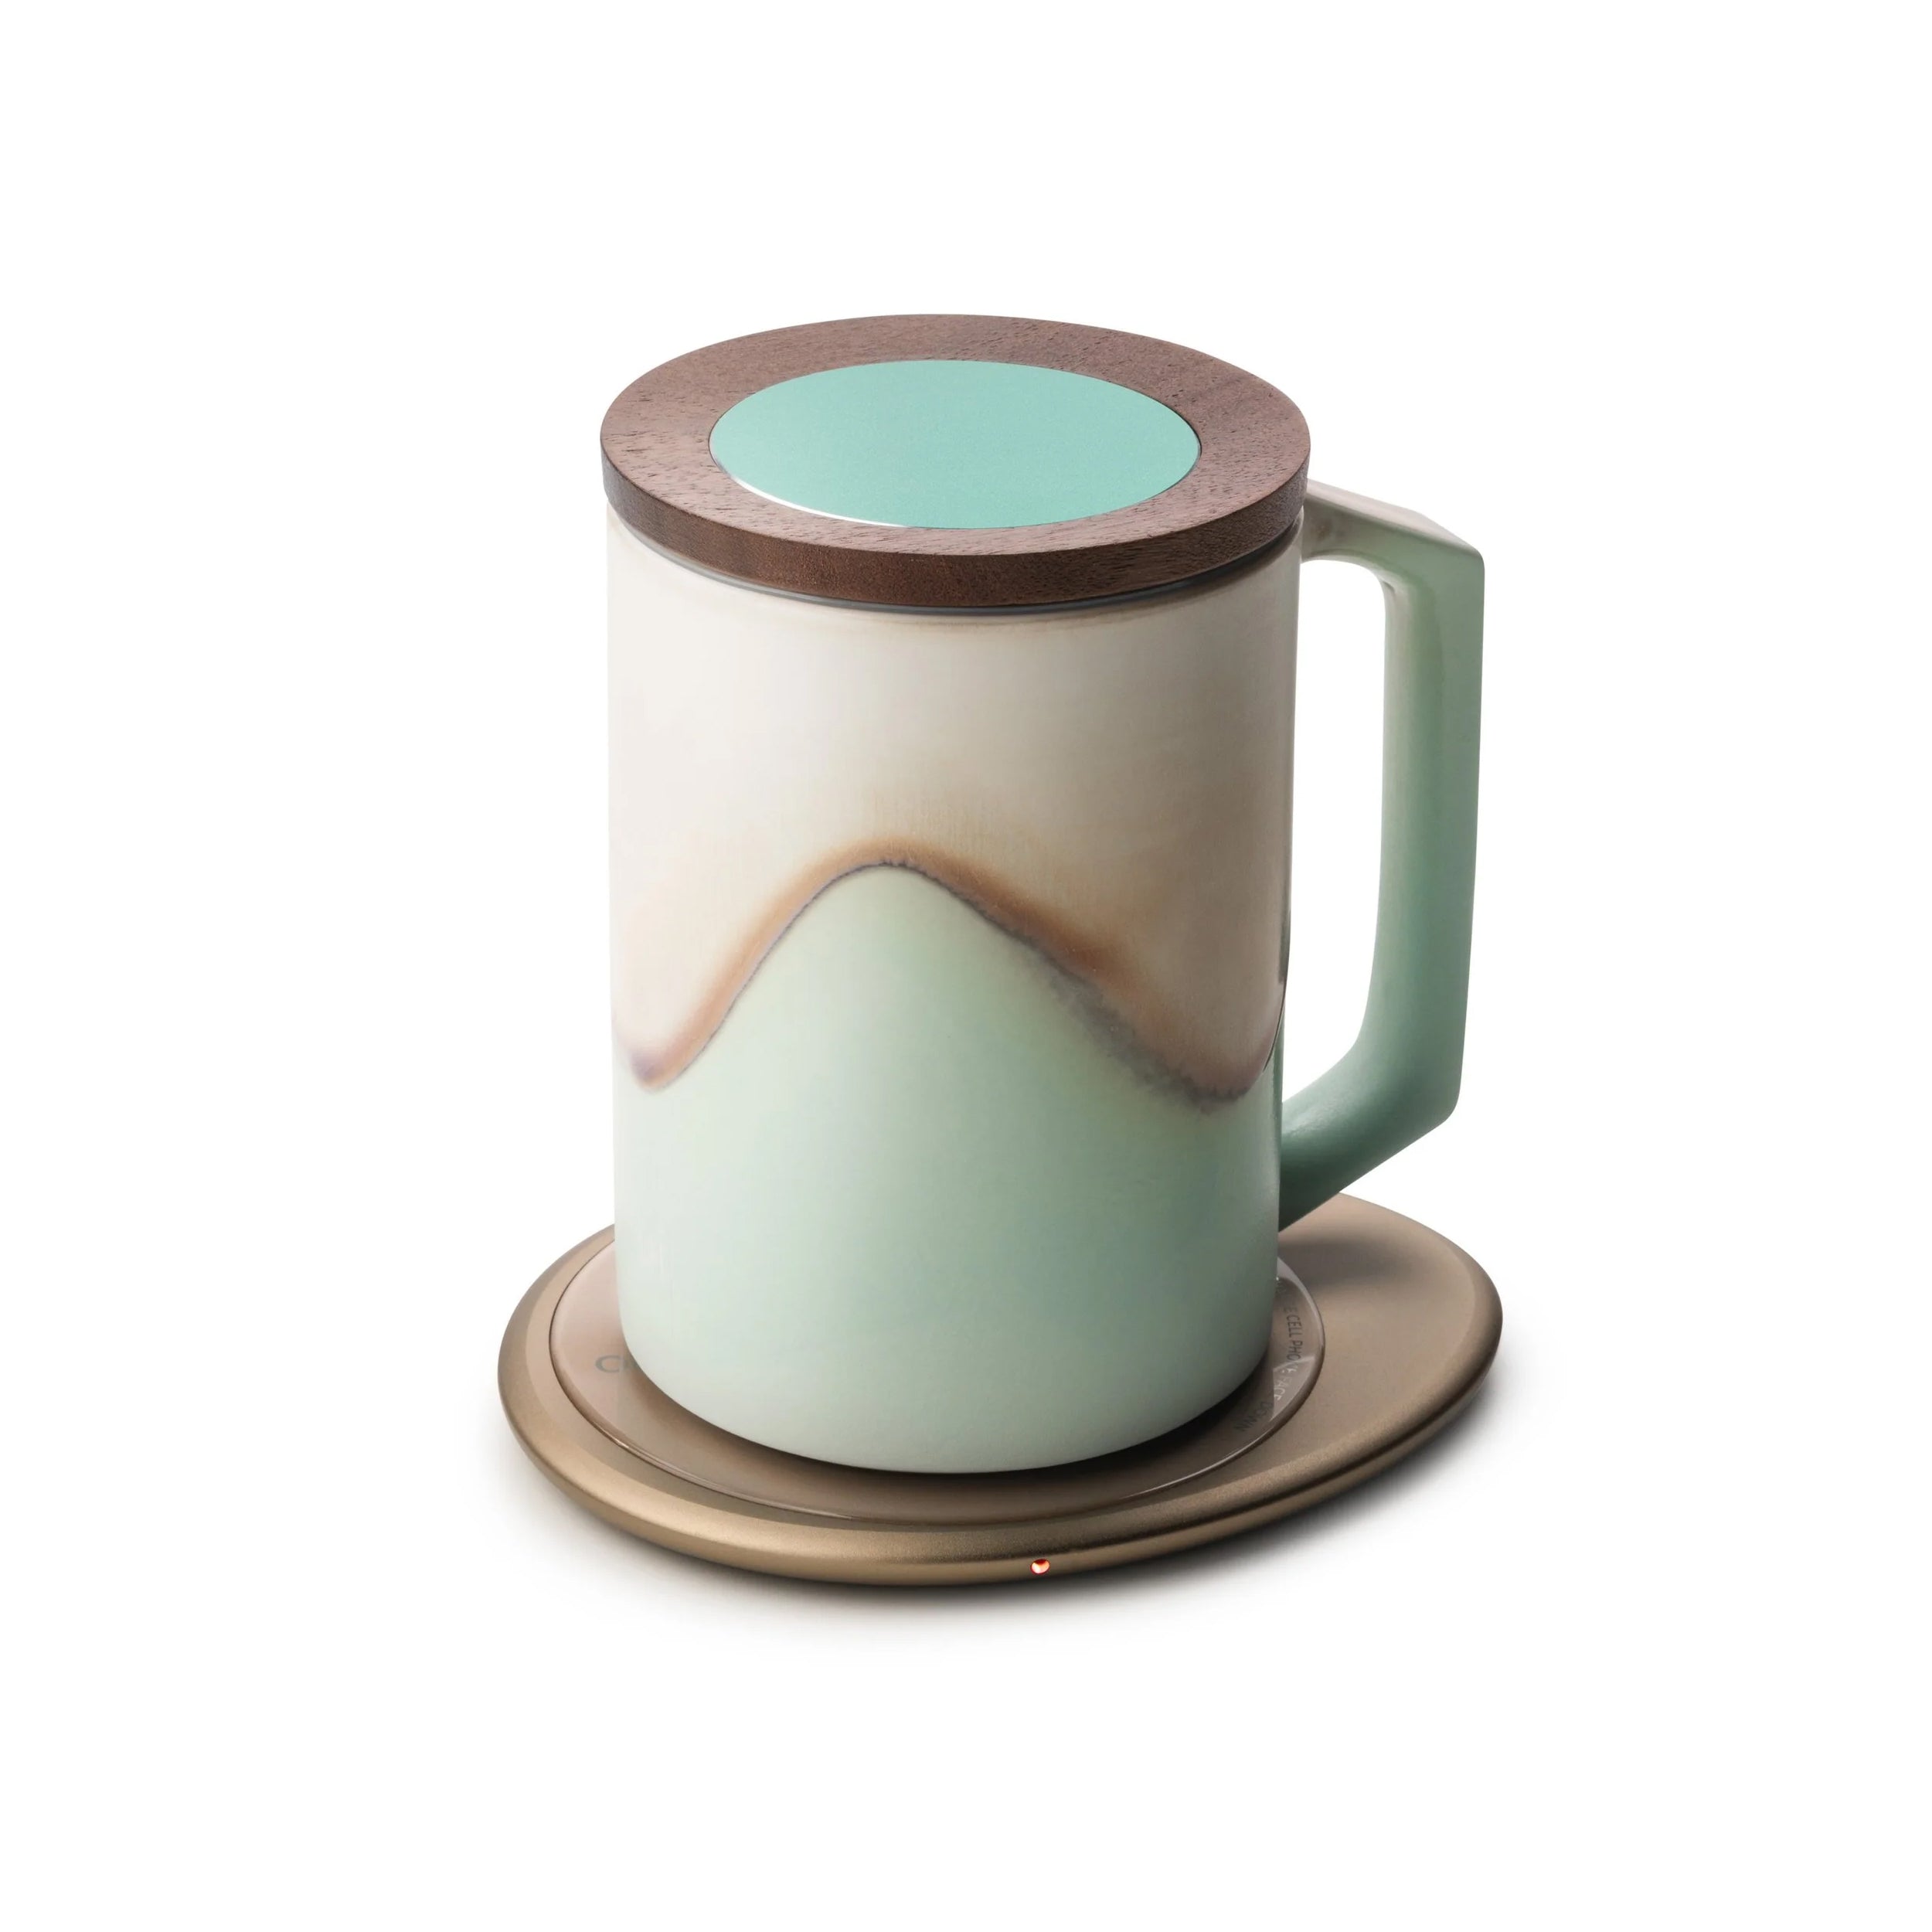 Mint colored mug with lid and design on top of pink pebble heating pad